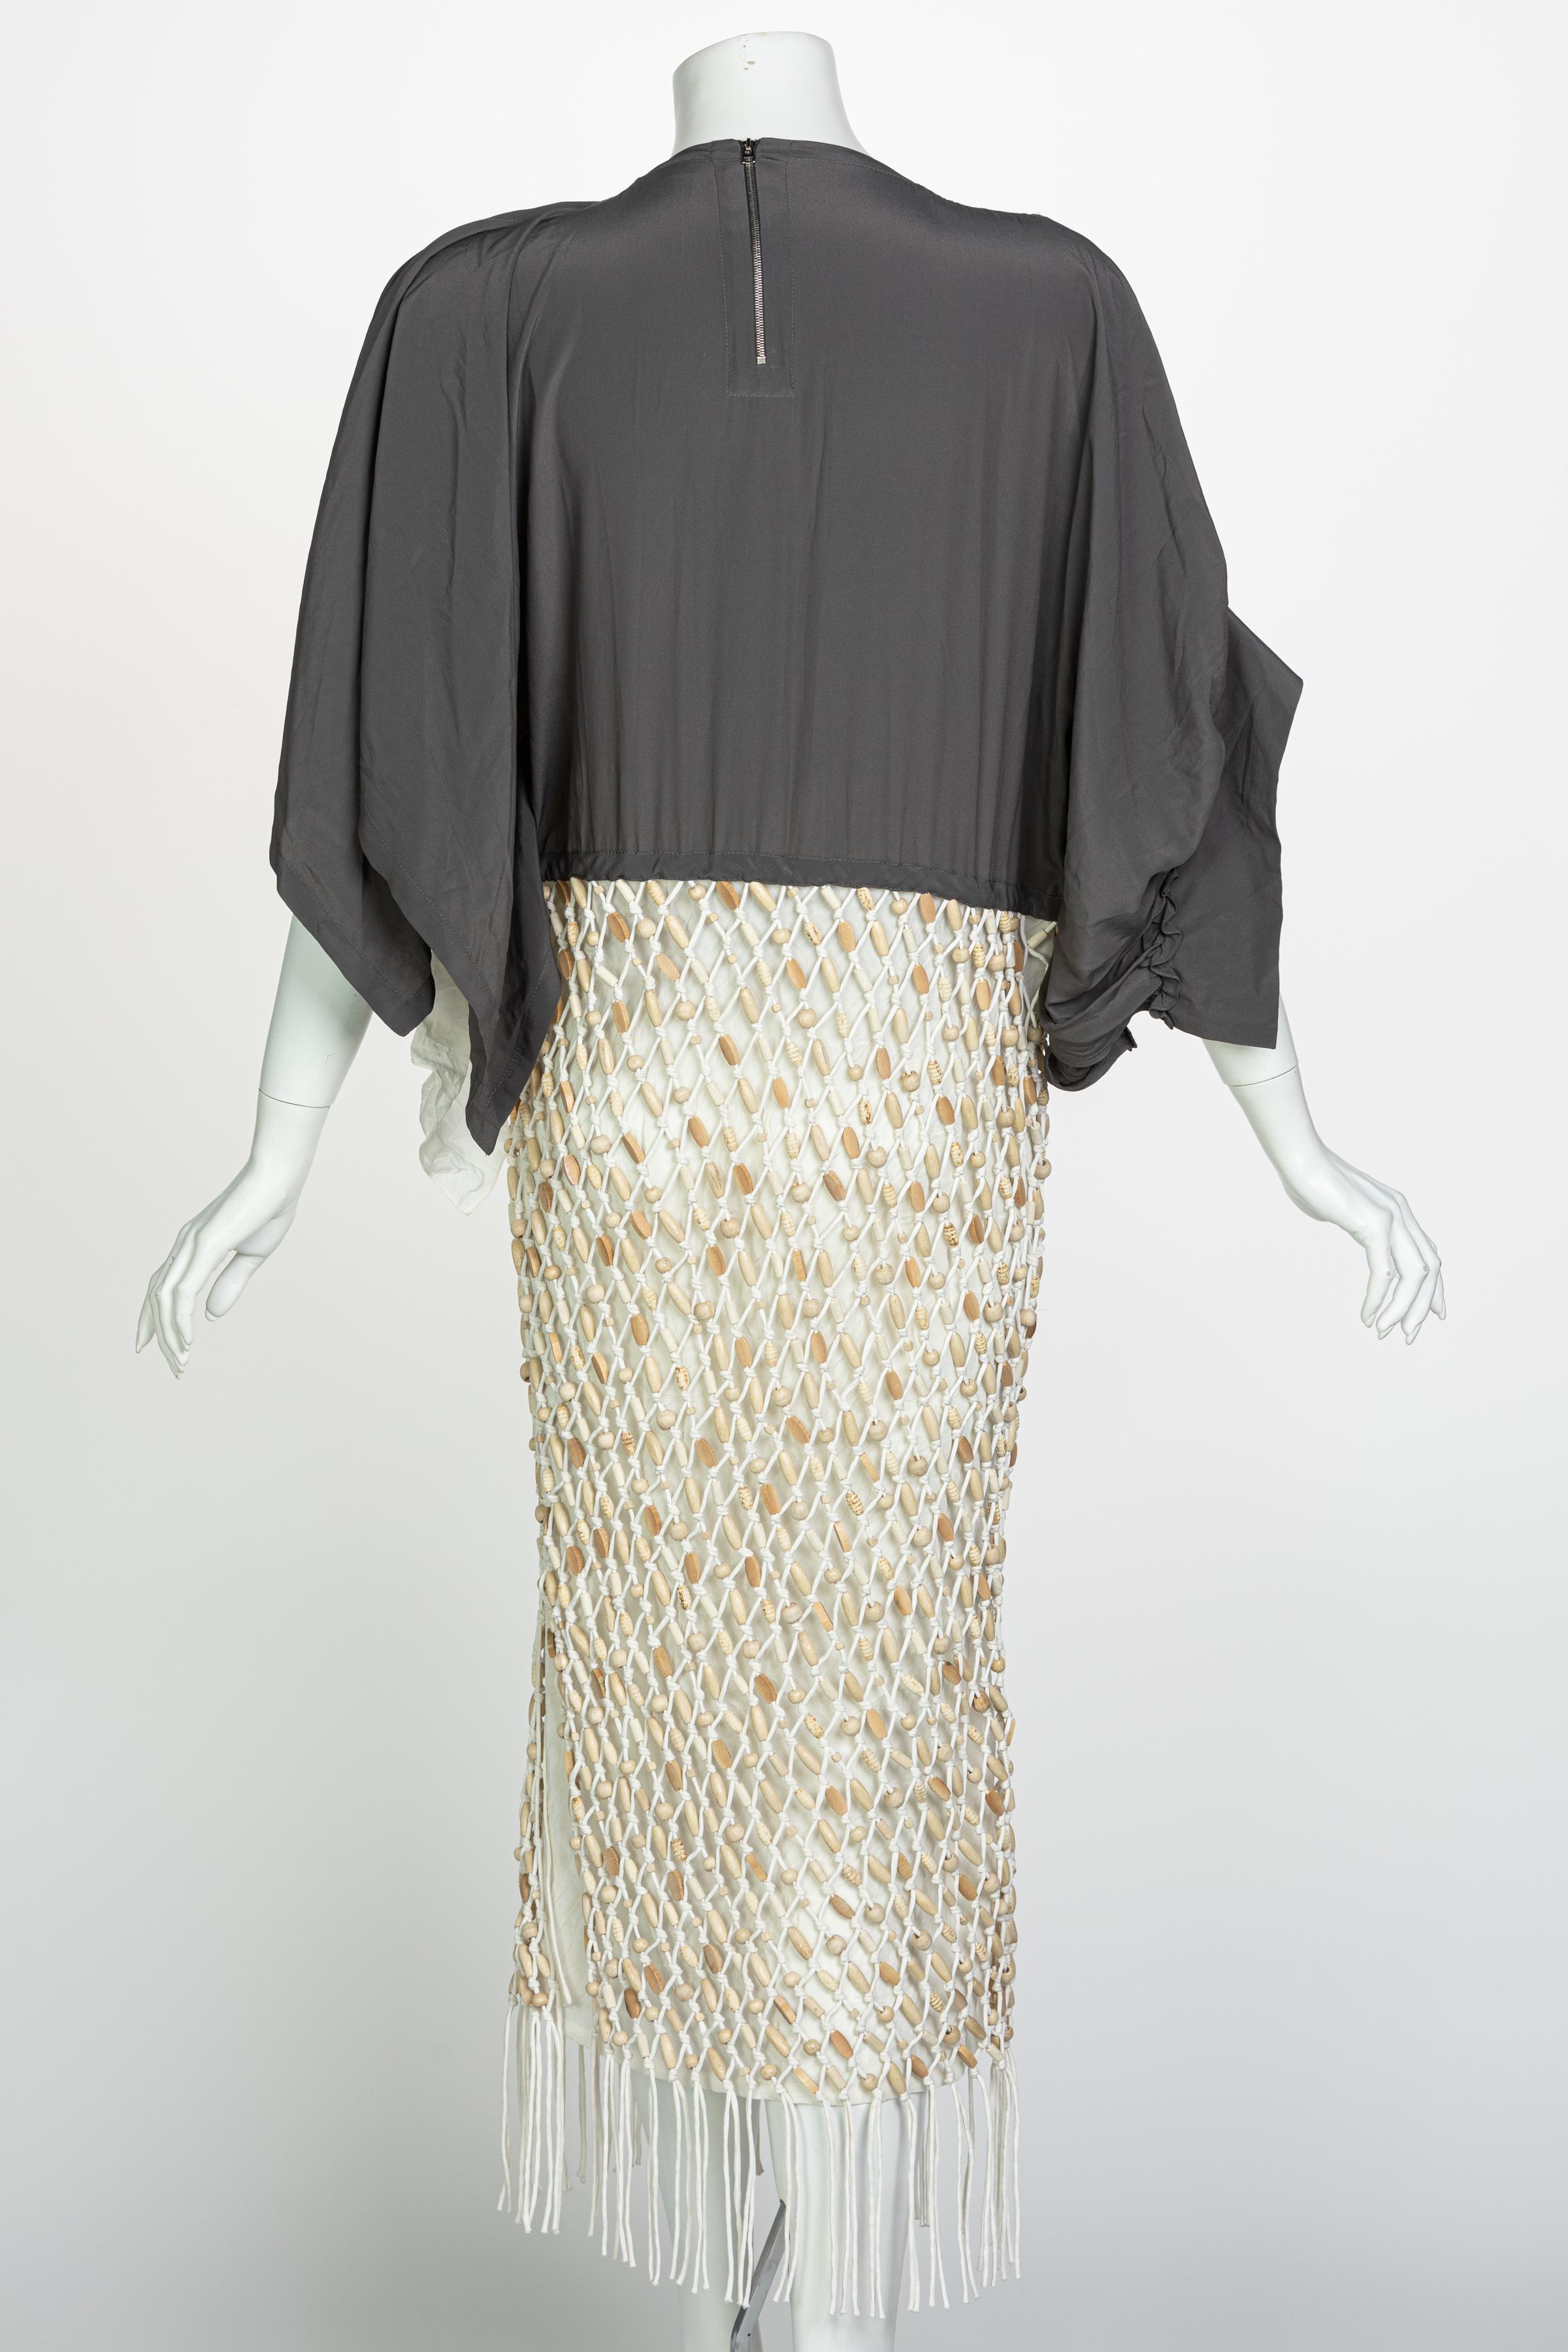 JW Anderson Silk Macrame Wood Beaded Fringe Dress Runway Spring 2019 In Excellent Condition For Sale In Boca Raton, FL